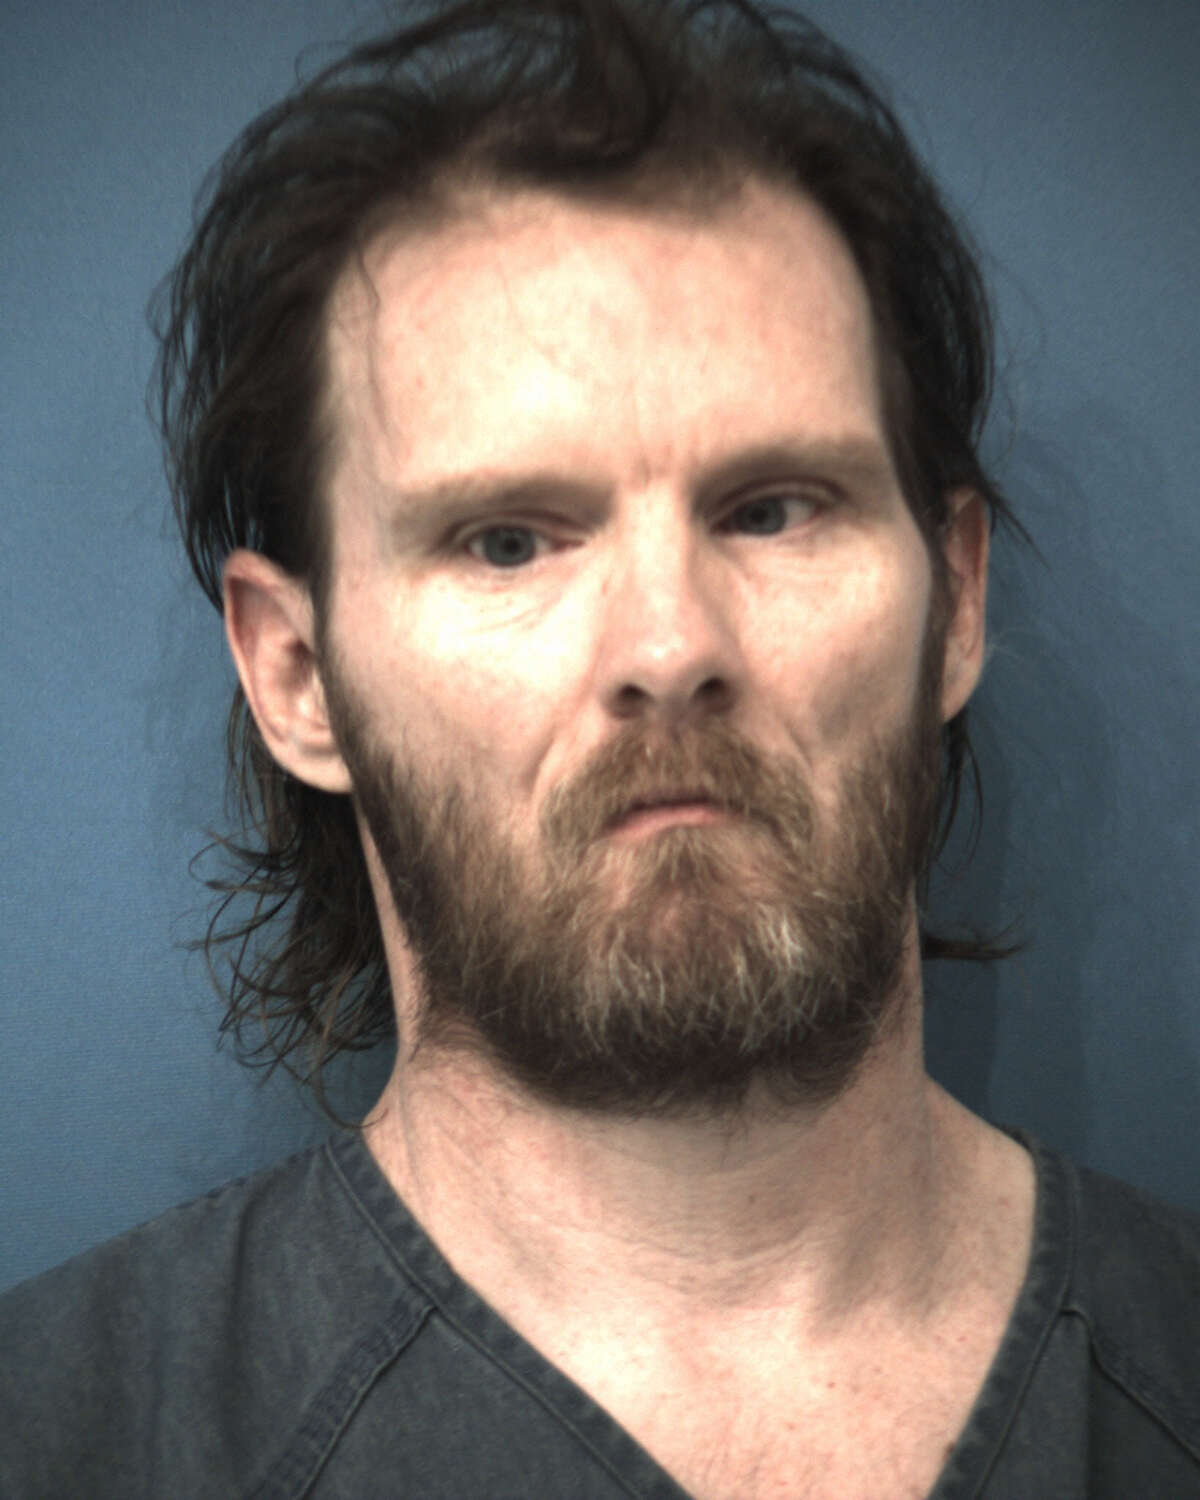 Dylan Hosmer, 45, was arrested April 22 in Williamson County as part of a nationwide sting operation against child predators, according to the Texas Attorney General's Office.